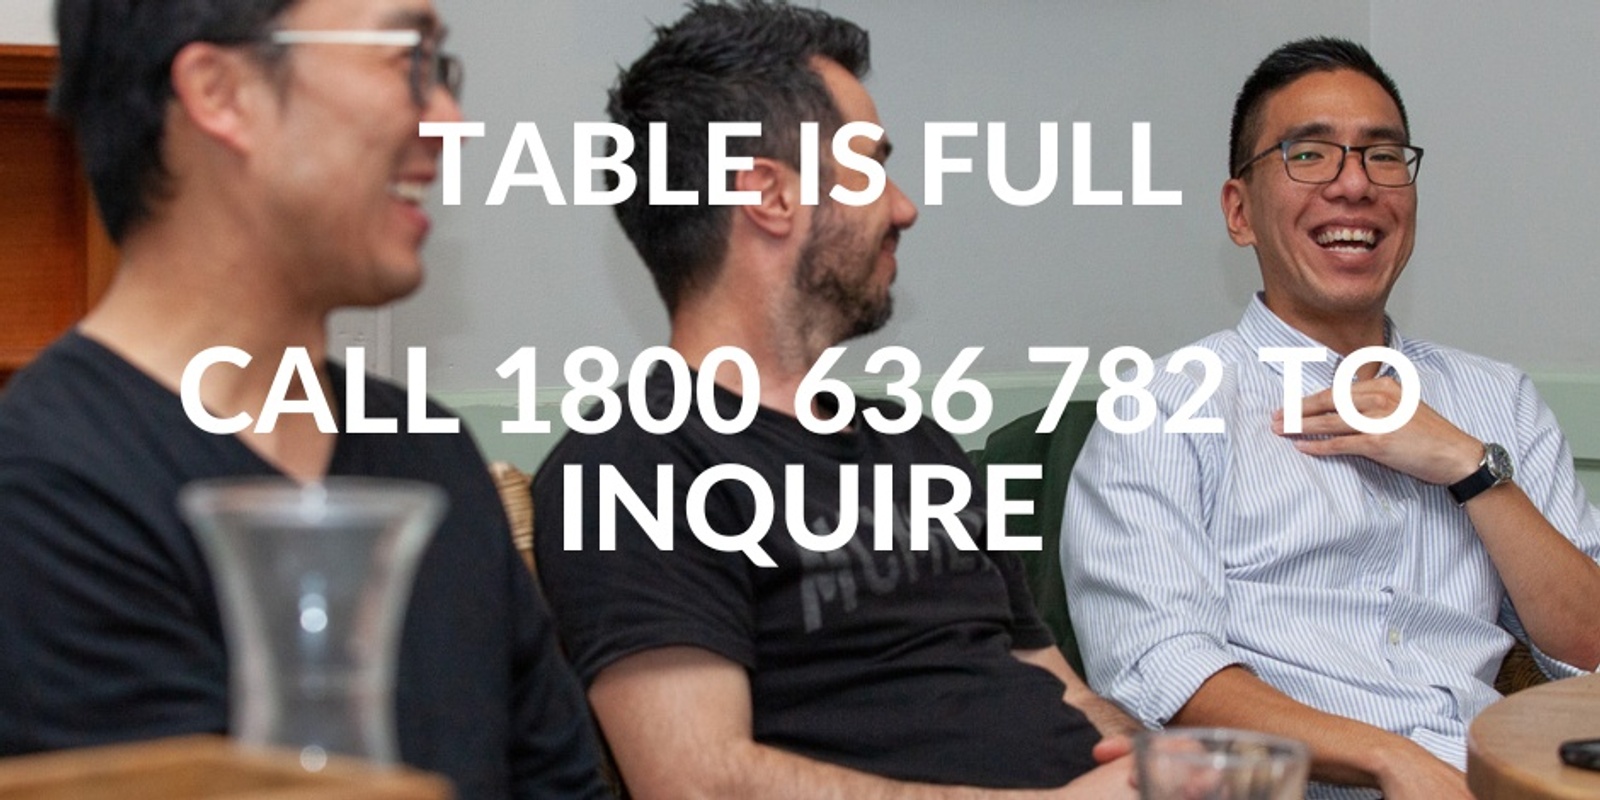 Banner image for CARLINGFORD / EPPING Location - Men's Table Entree  Monday  Feb 13 630-9pm